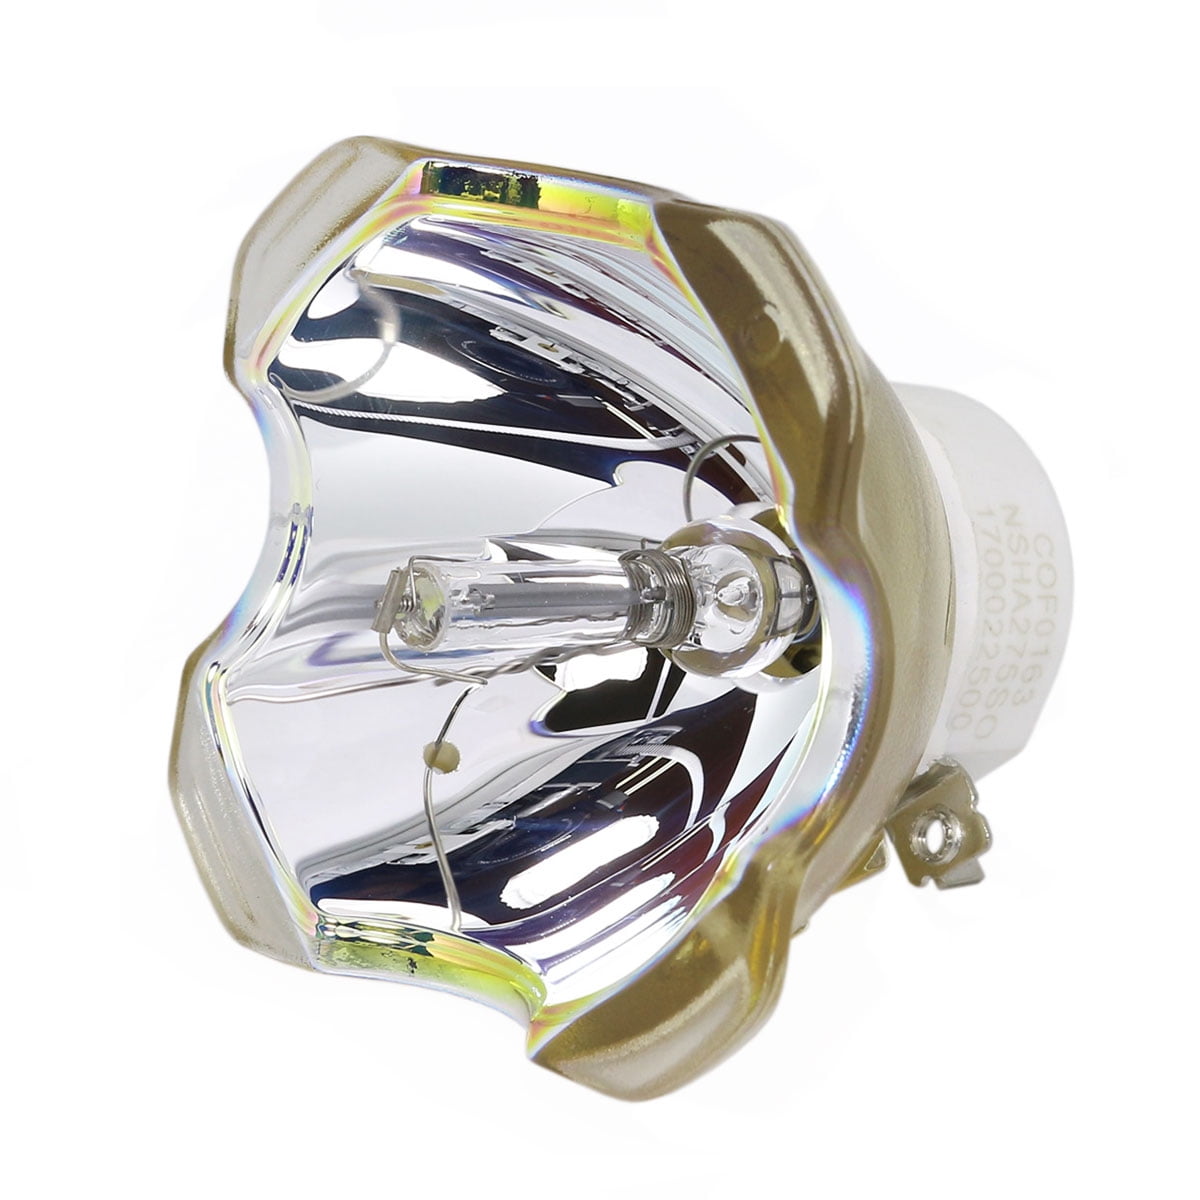 Replacement for Panasonic Pt-vx500u Lamp & Housing Projector Tv Lamp Bulb by Technical Precision 